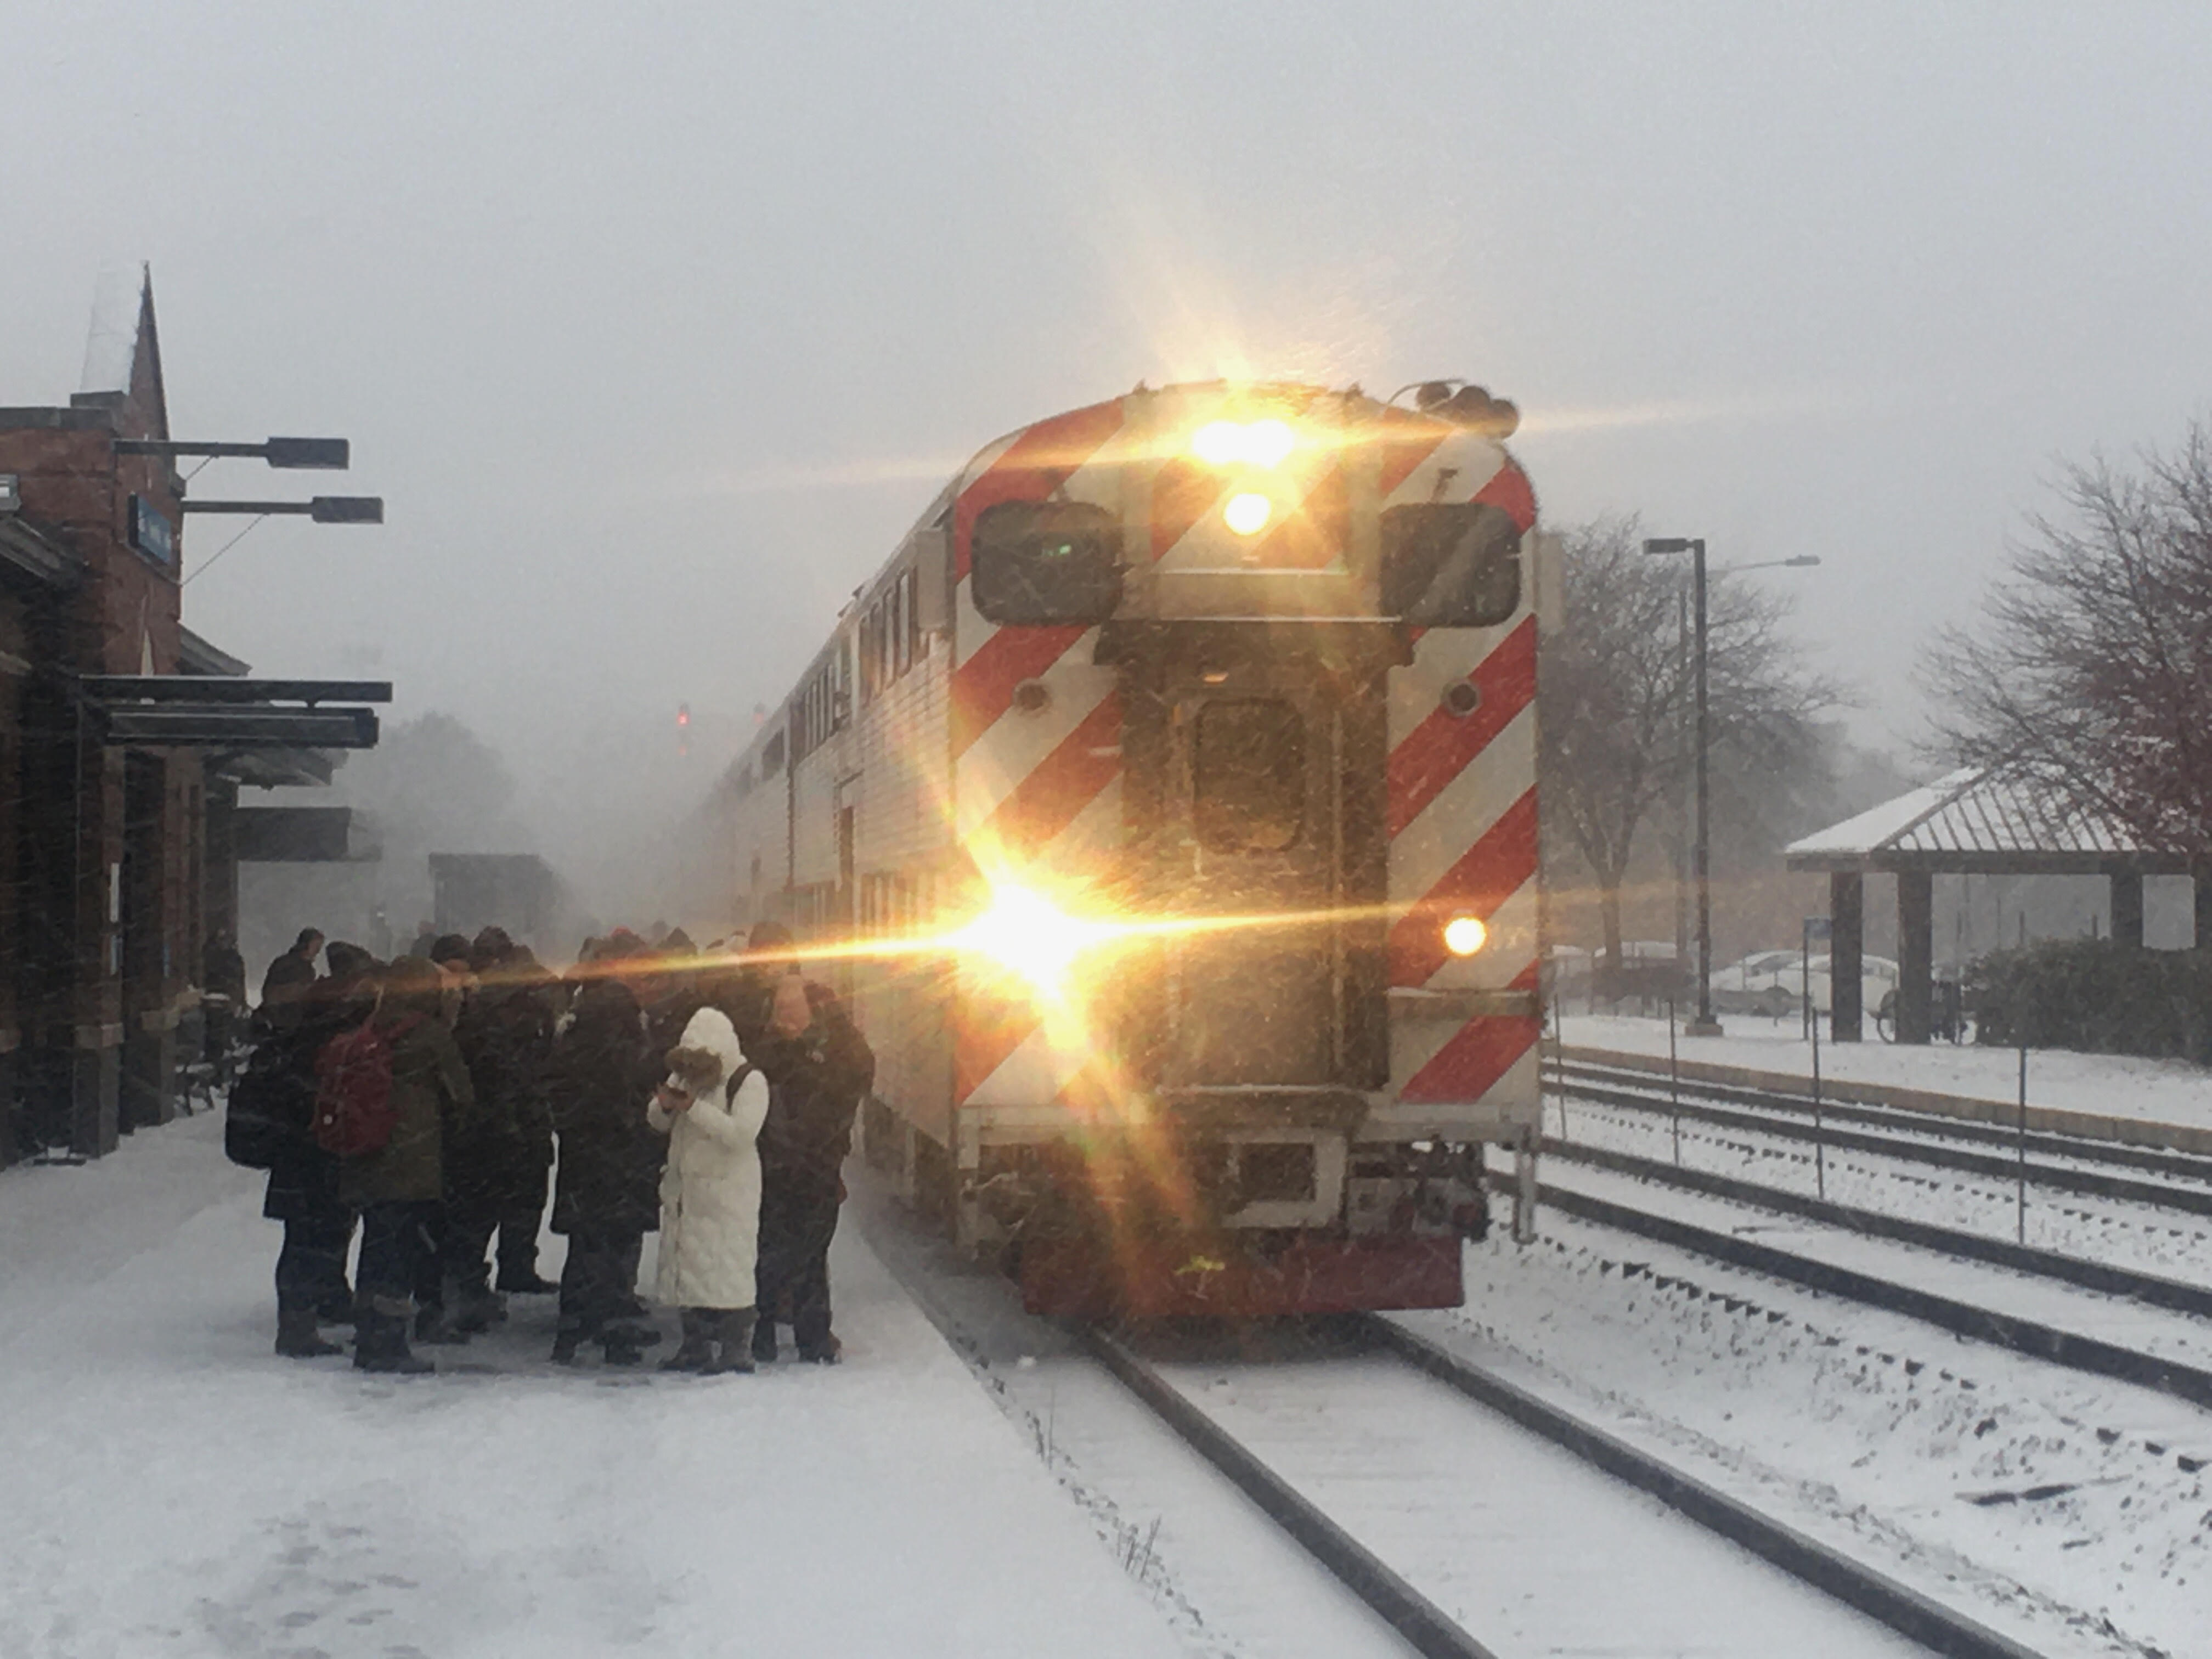 Temperatures will plummet as low as 12 degrees Nov. 12, 2019, the National Weather Service said. Commuters bundle up at a Metra station in Naperville.